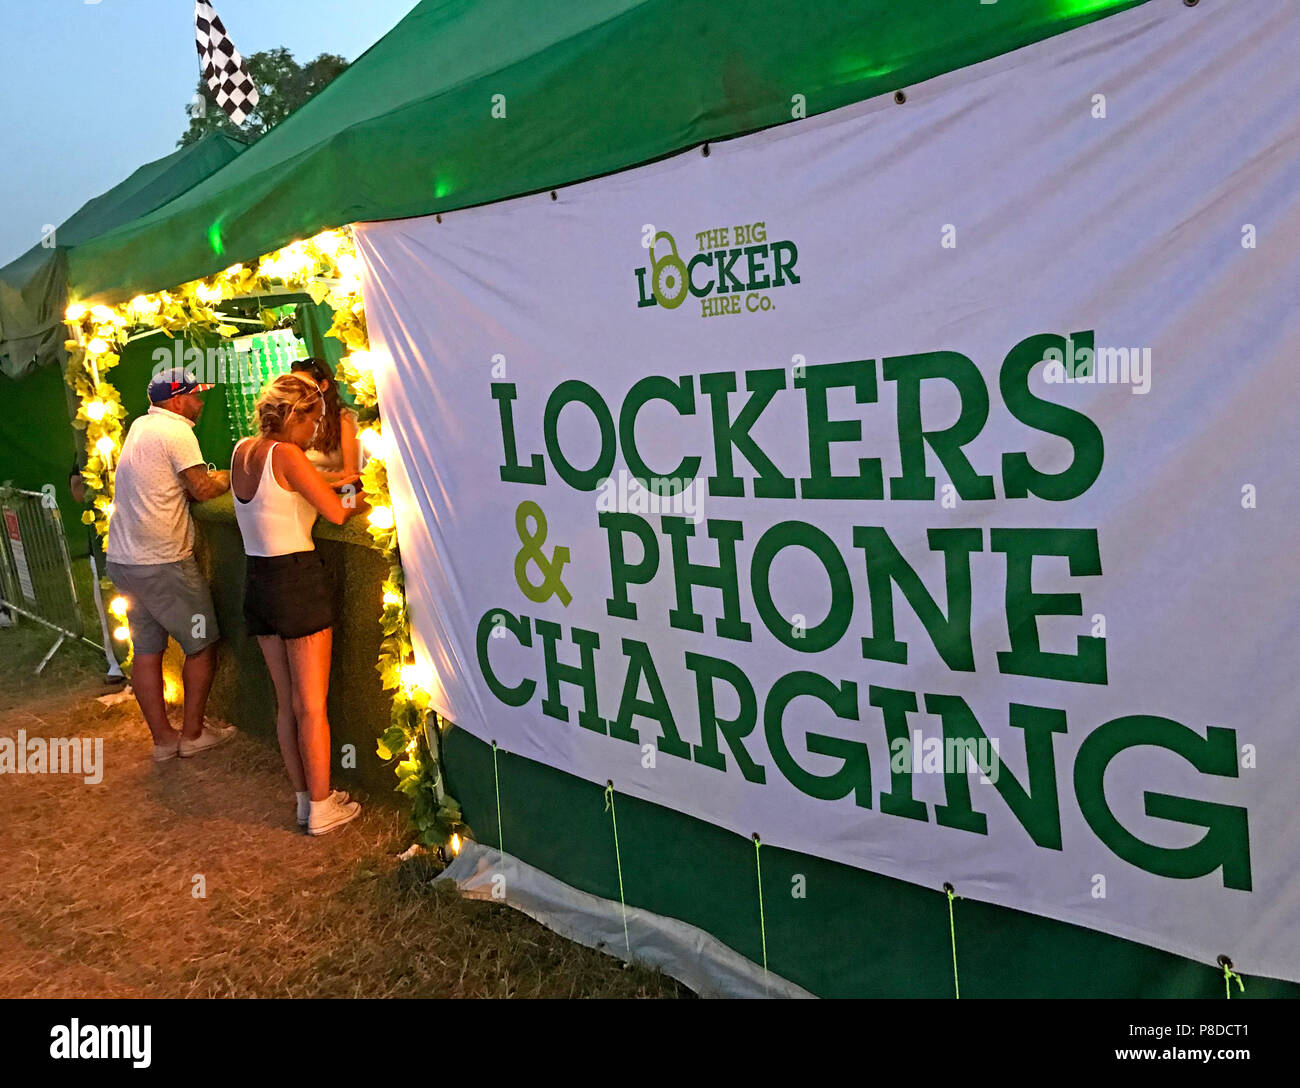 The Big Locker Hire Co, Lockers & Phone Charging, essential , festival,event services, people buying charge Stock Photo